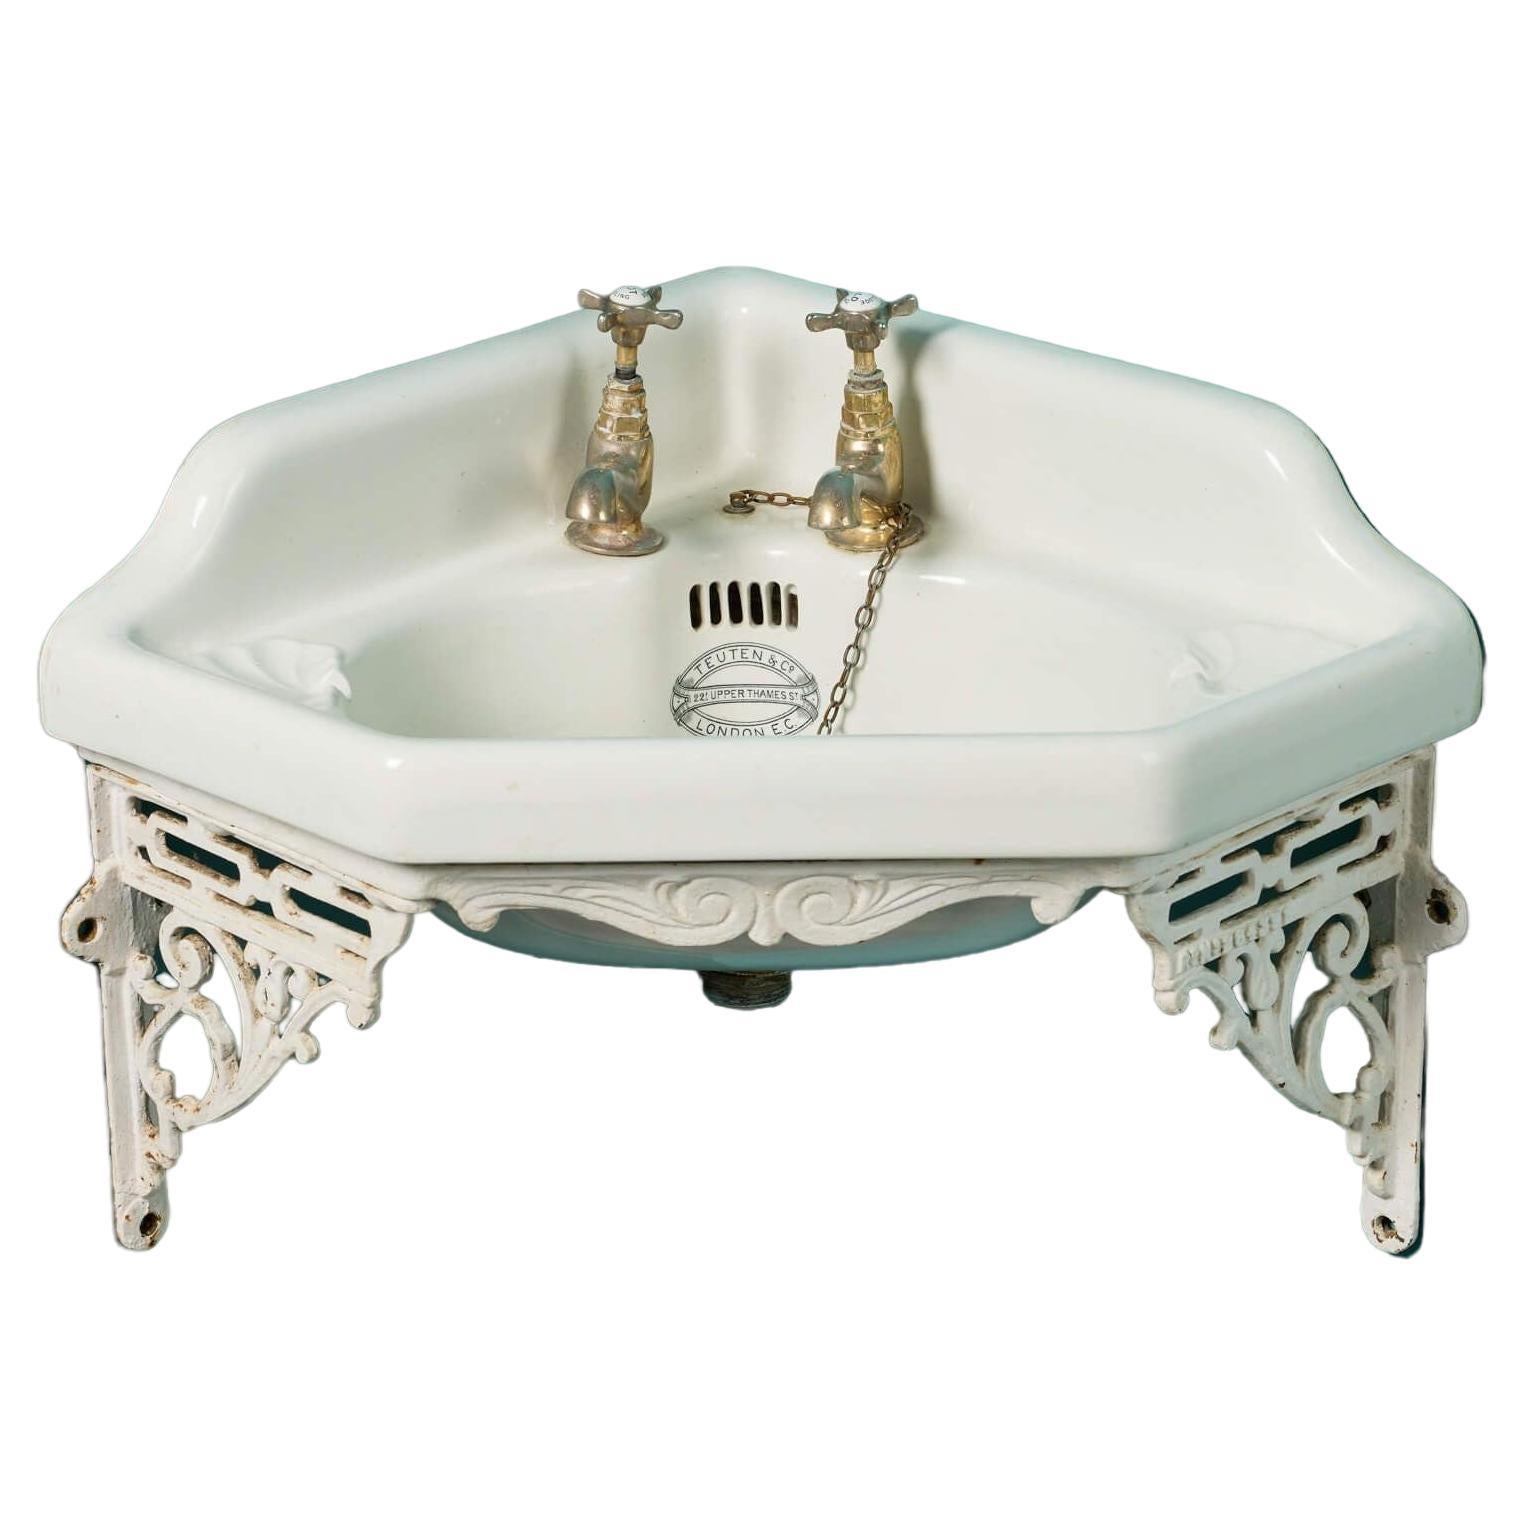 Antique Victorian Corner Sink with Wall Bracket For Sale